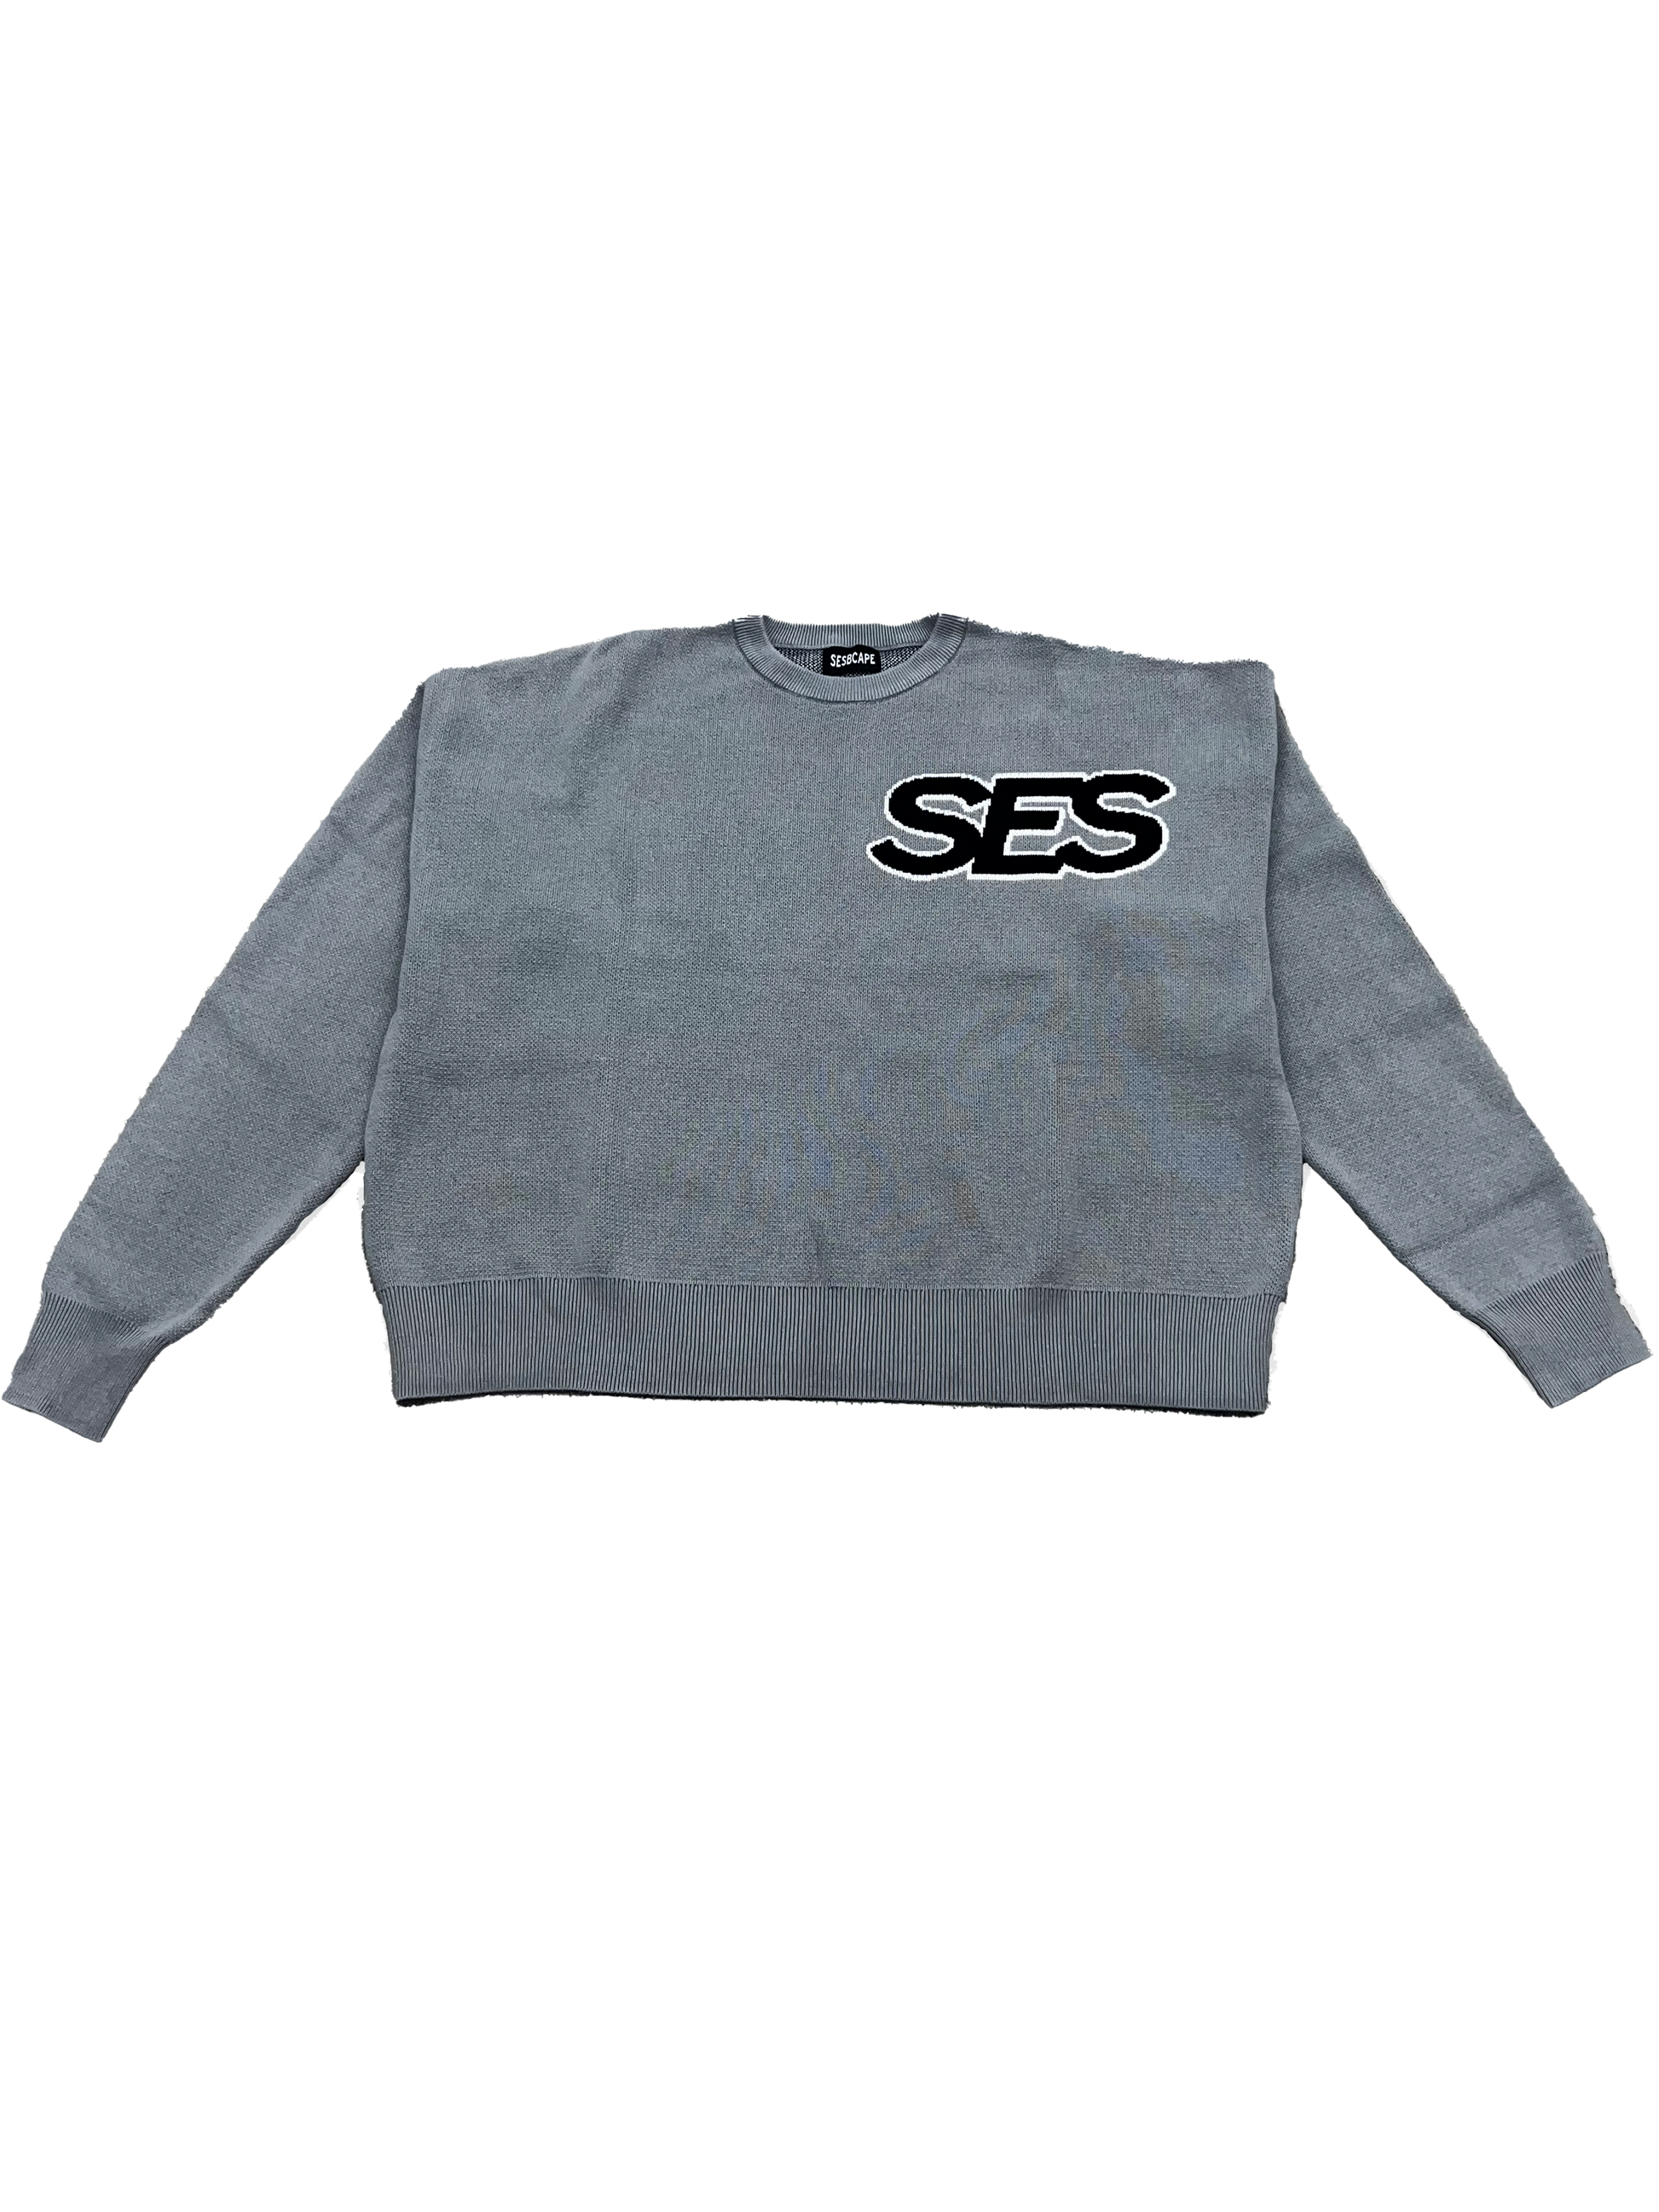 SES Grey B Sweater | SES Sweater | Sesbcape